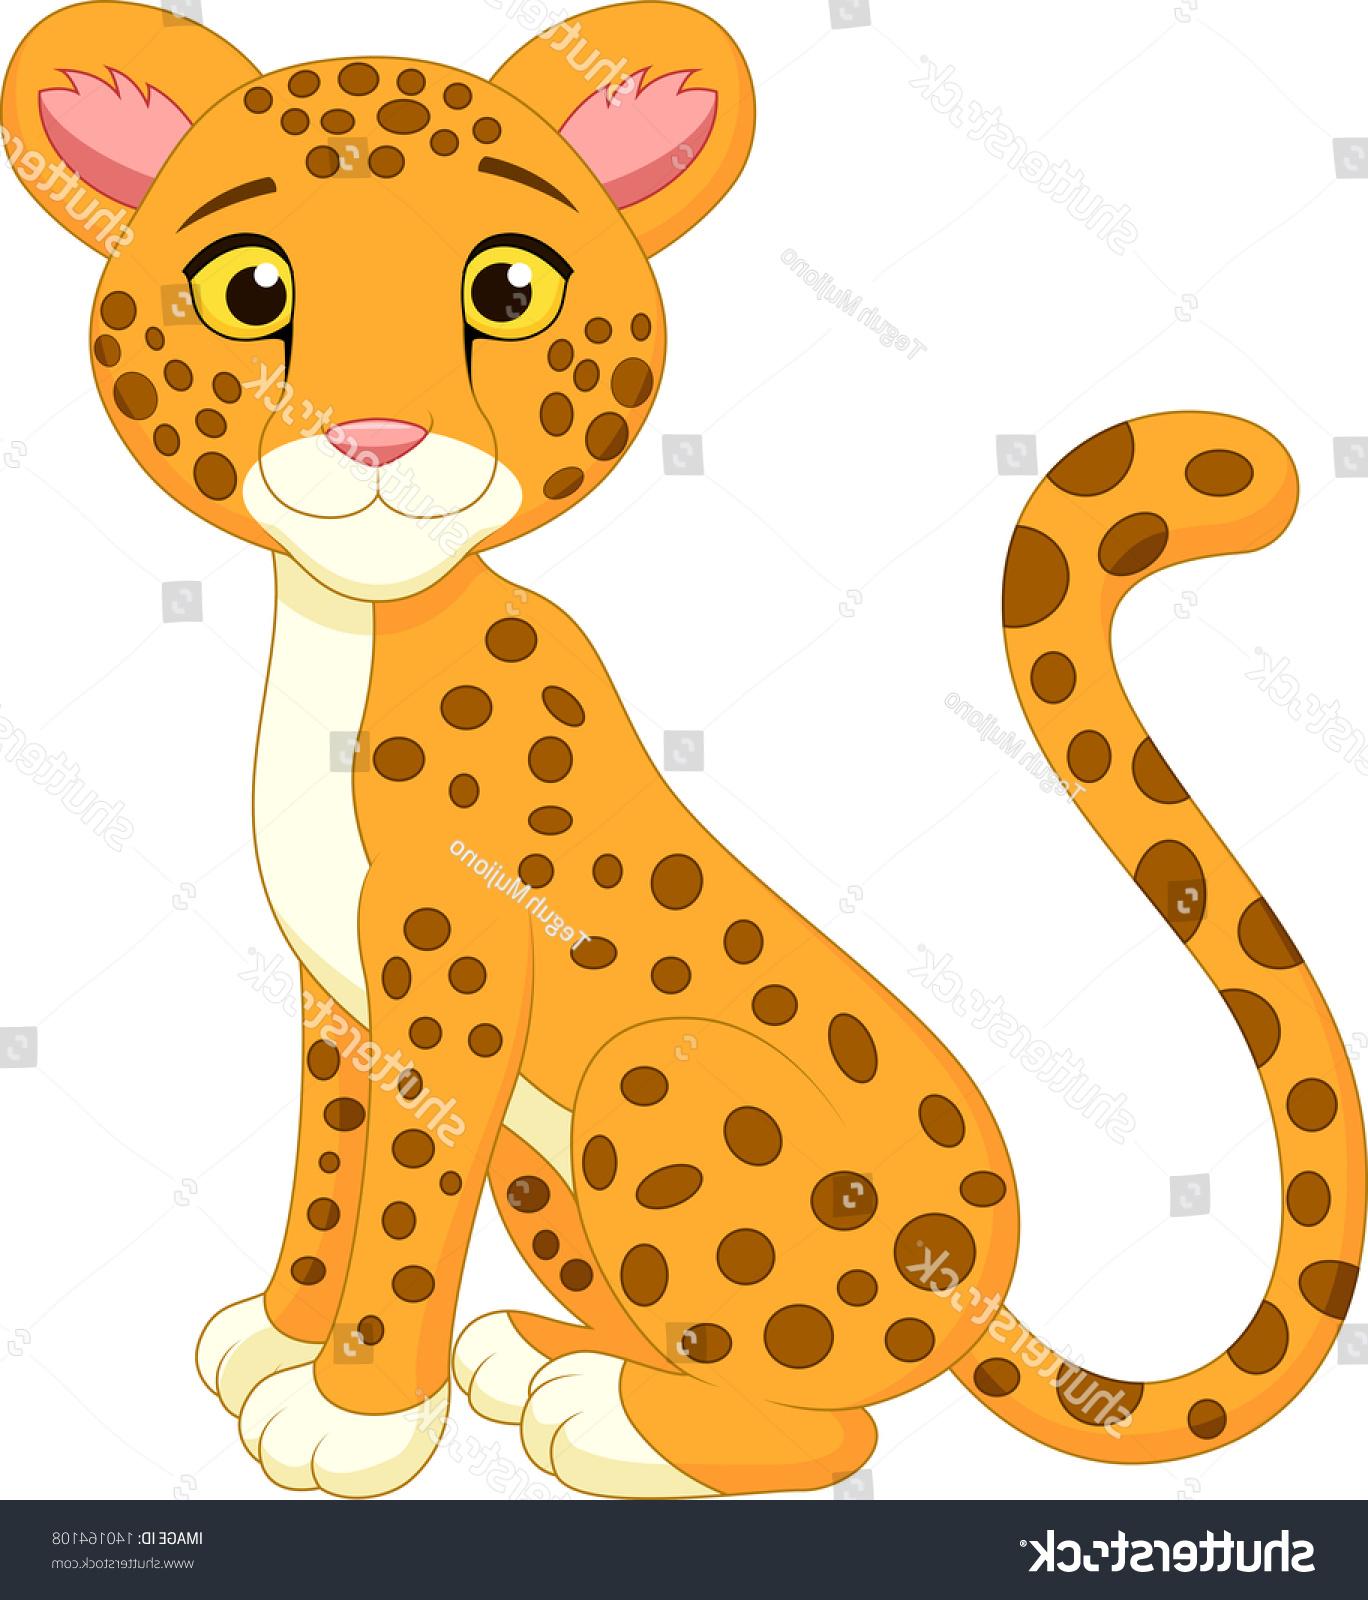 Cheetah Drawing Easy Cute - How To Draw A Simple Cheetah For Kids : Buy ...